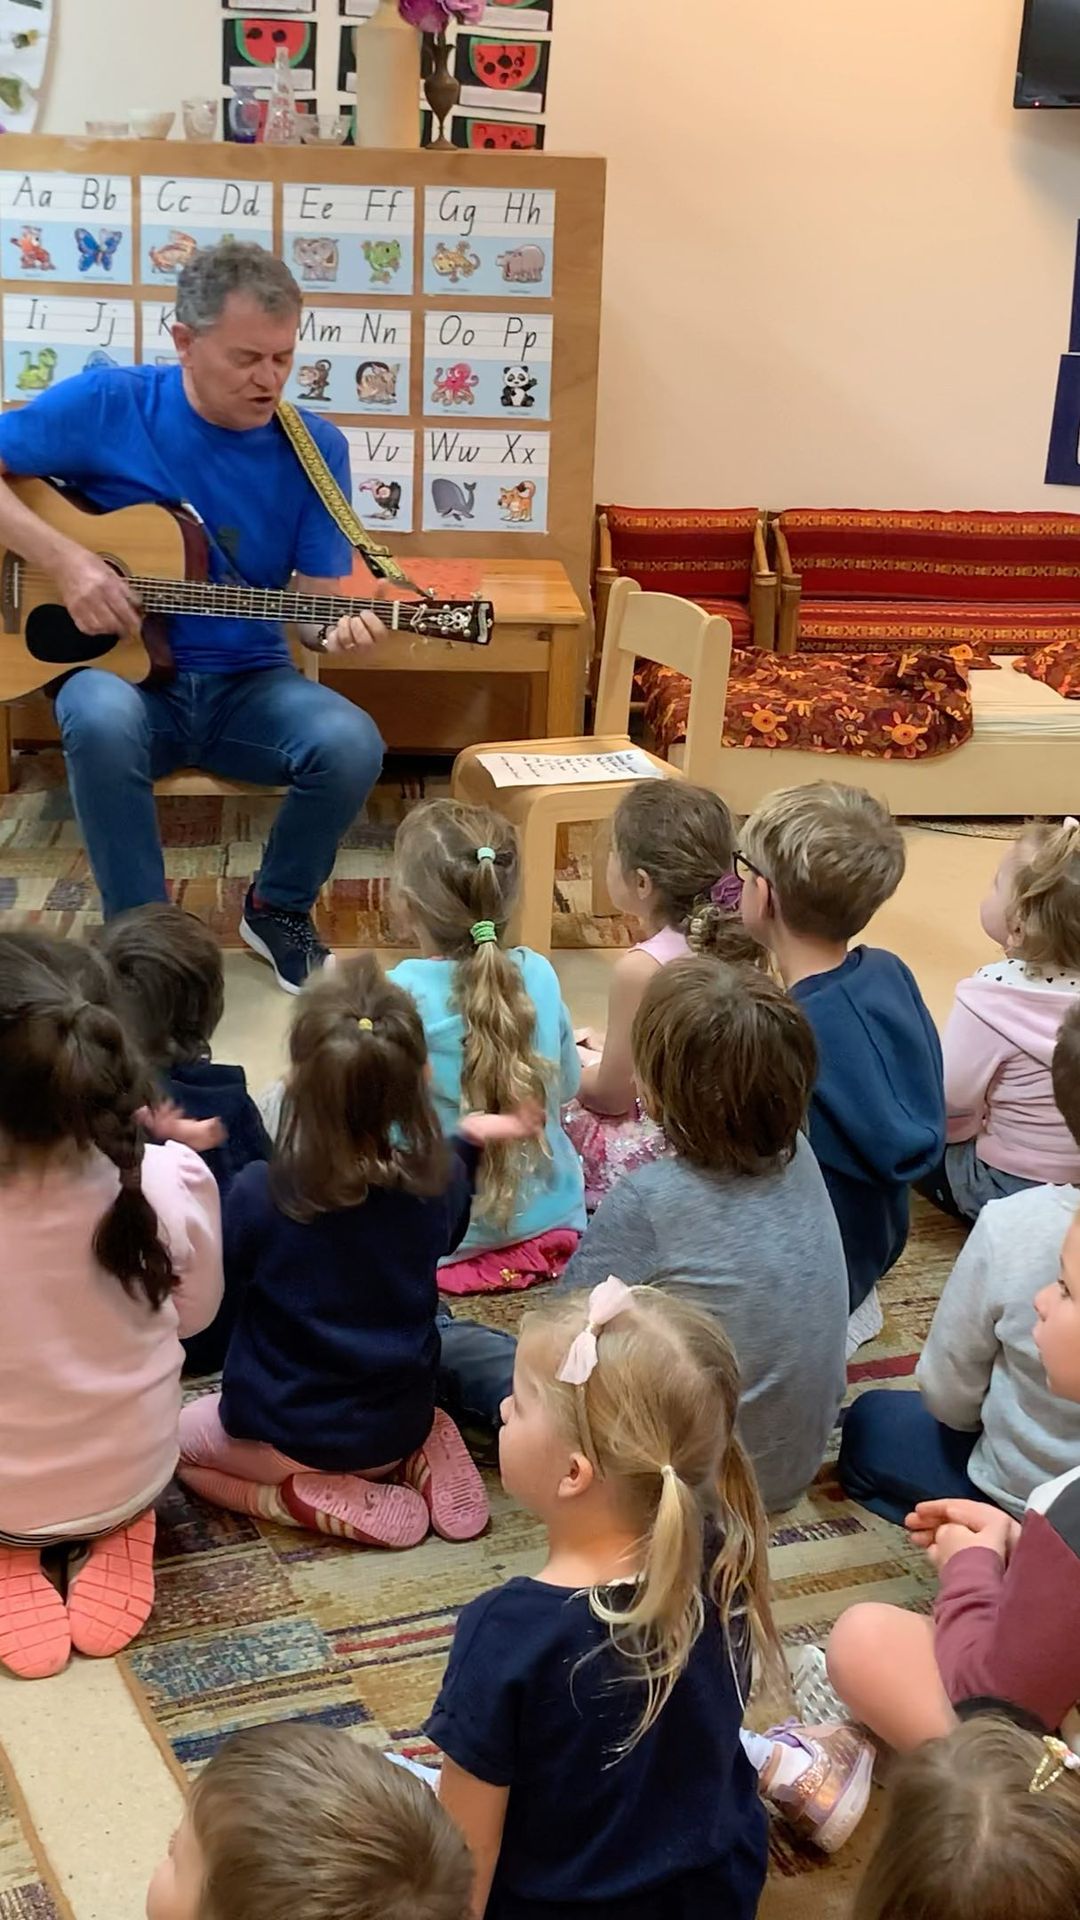 An all time favourite song among the children and staff...”Wash your face in orange juice” 🍊 
Thank you @petercombemusic for coming to put on a show for us 
#petercombe #music #show #singing #aheadstartcentres
